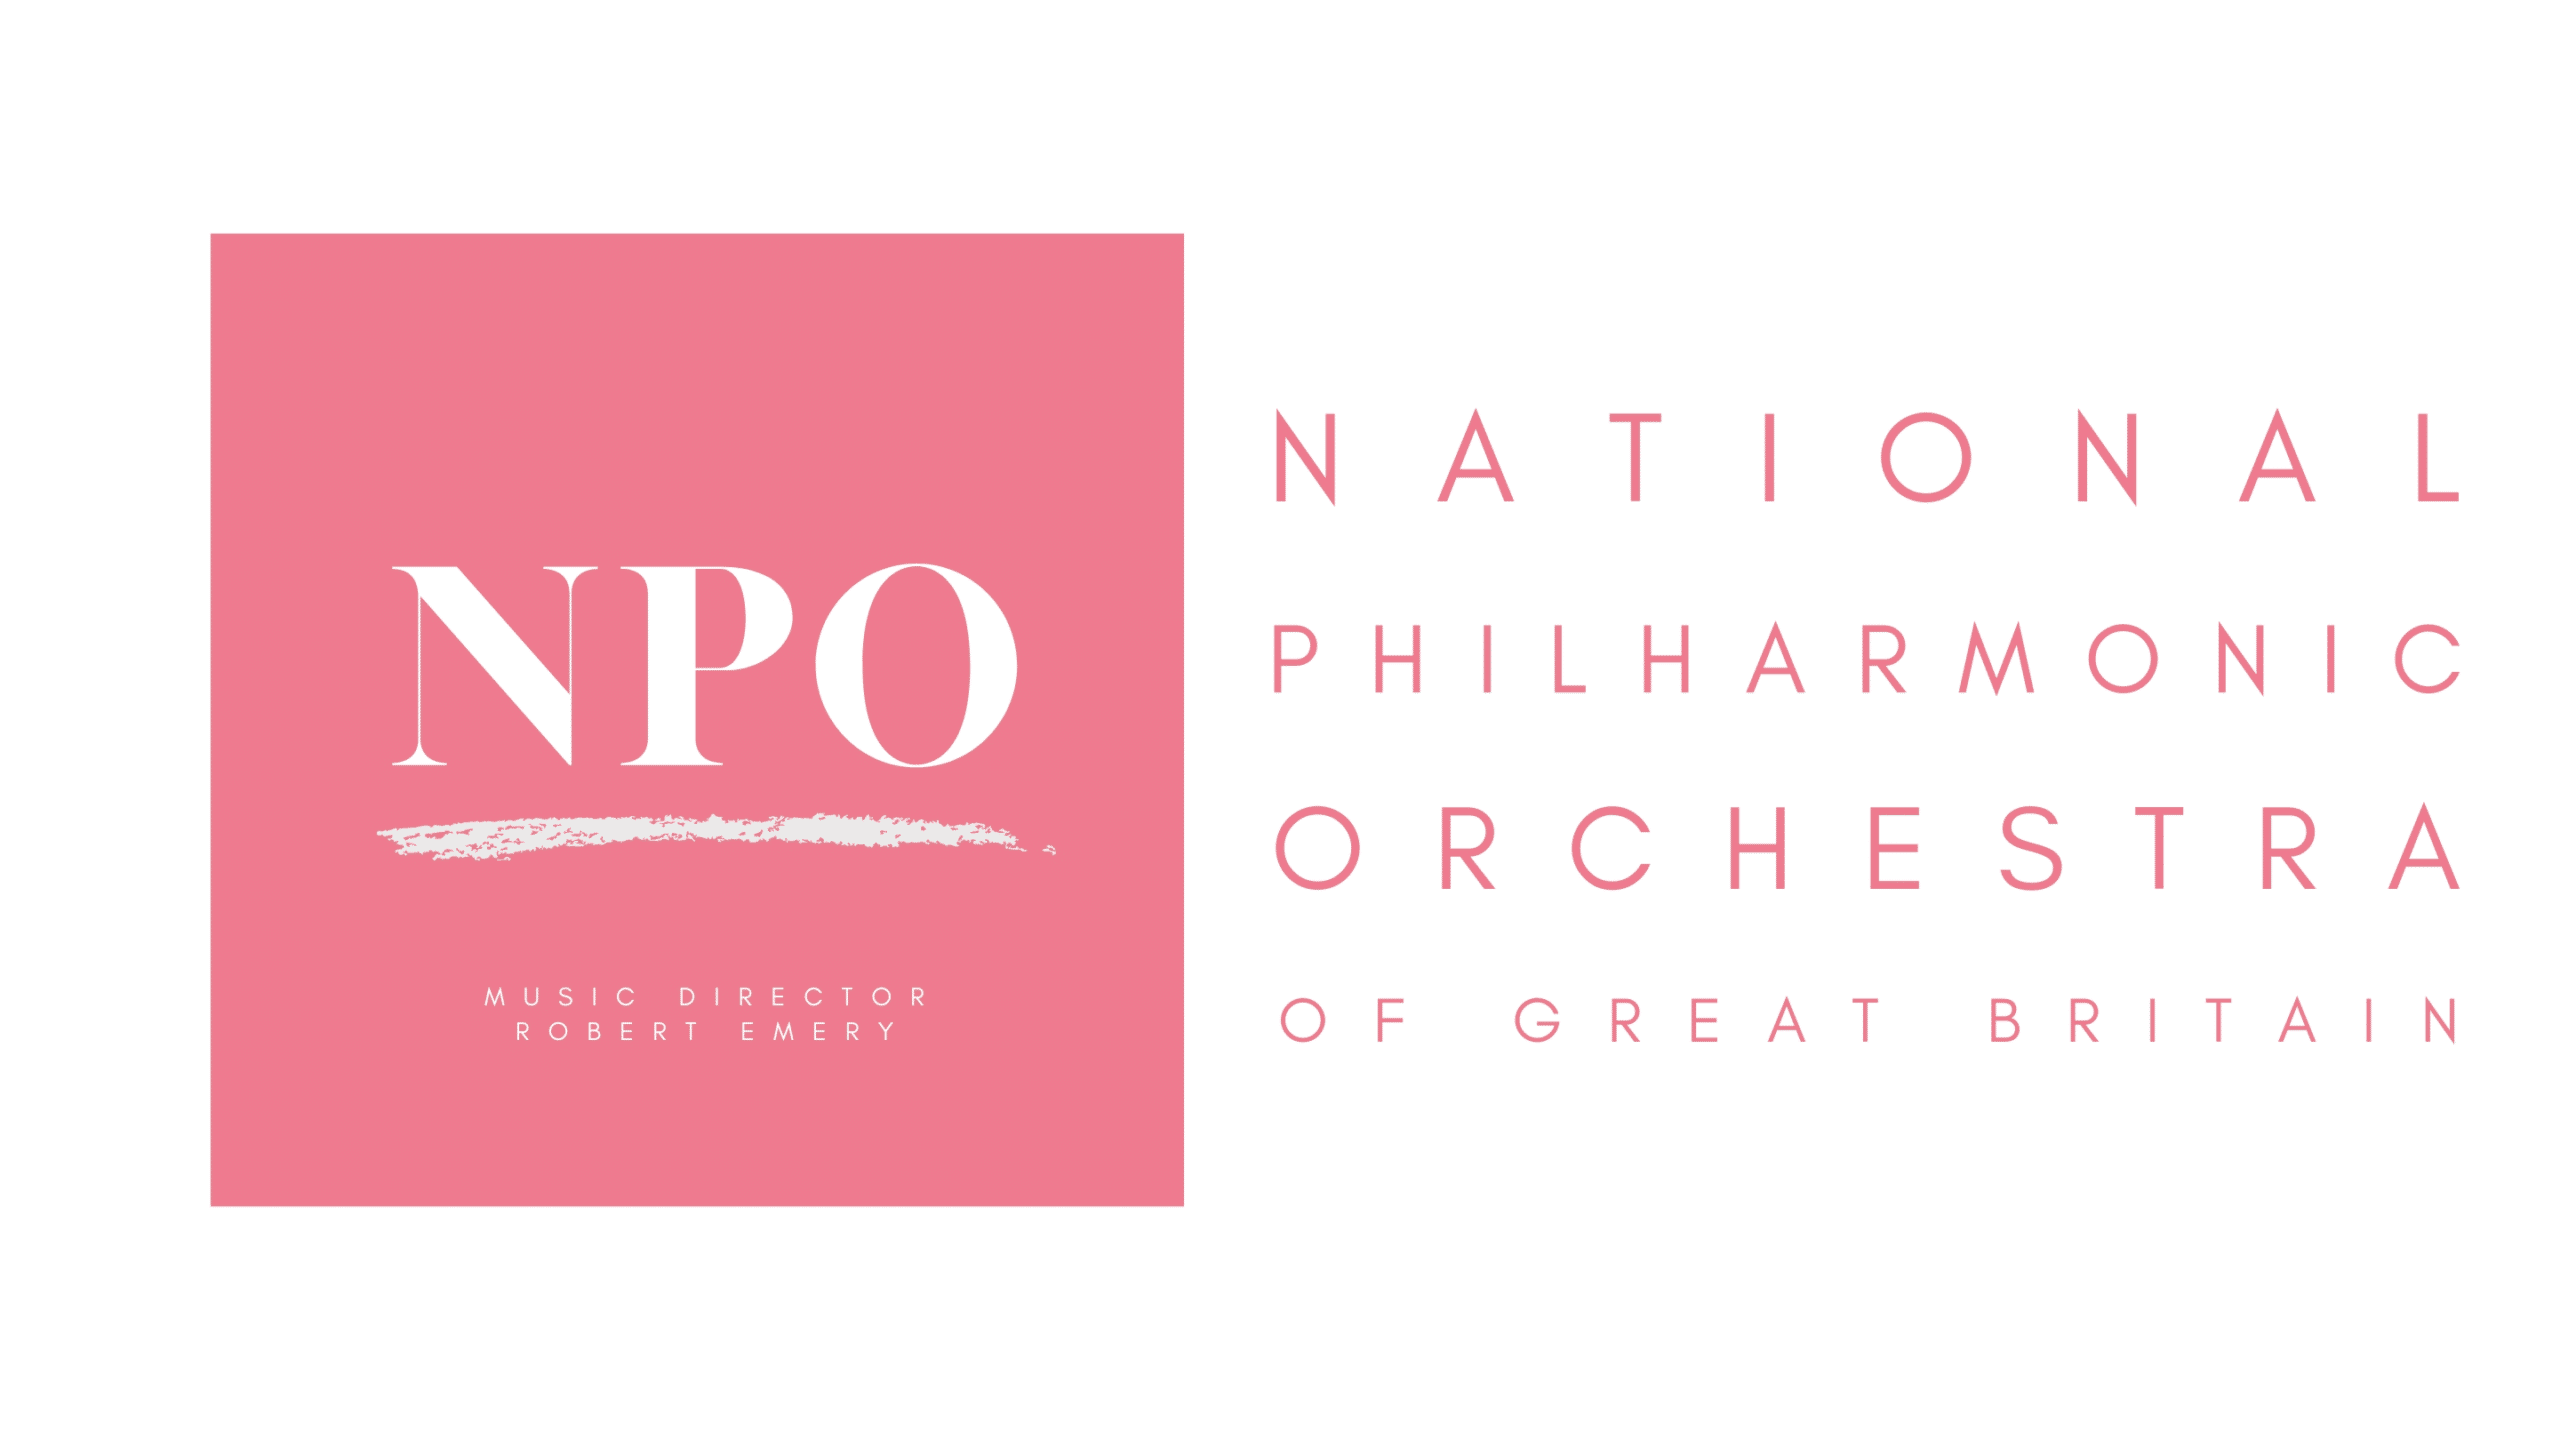 National Philharmonic Orchestra of Great Britain